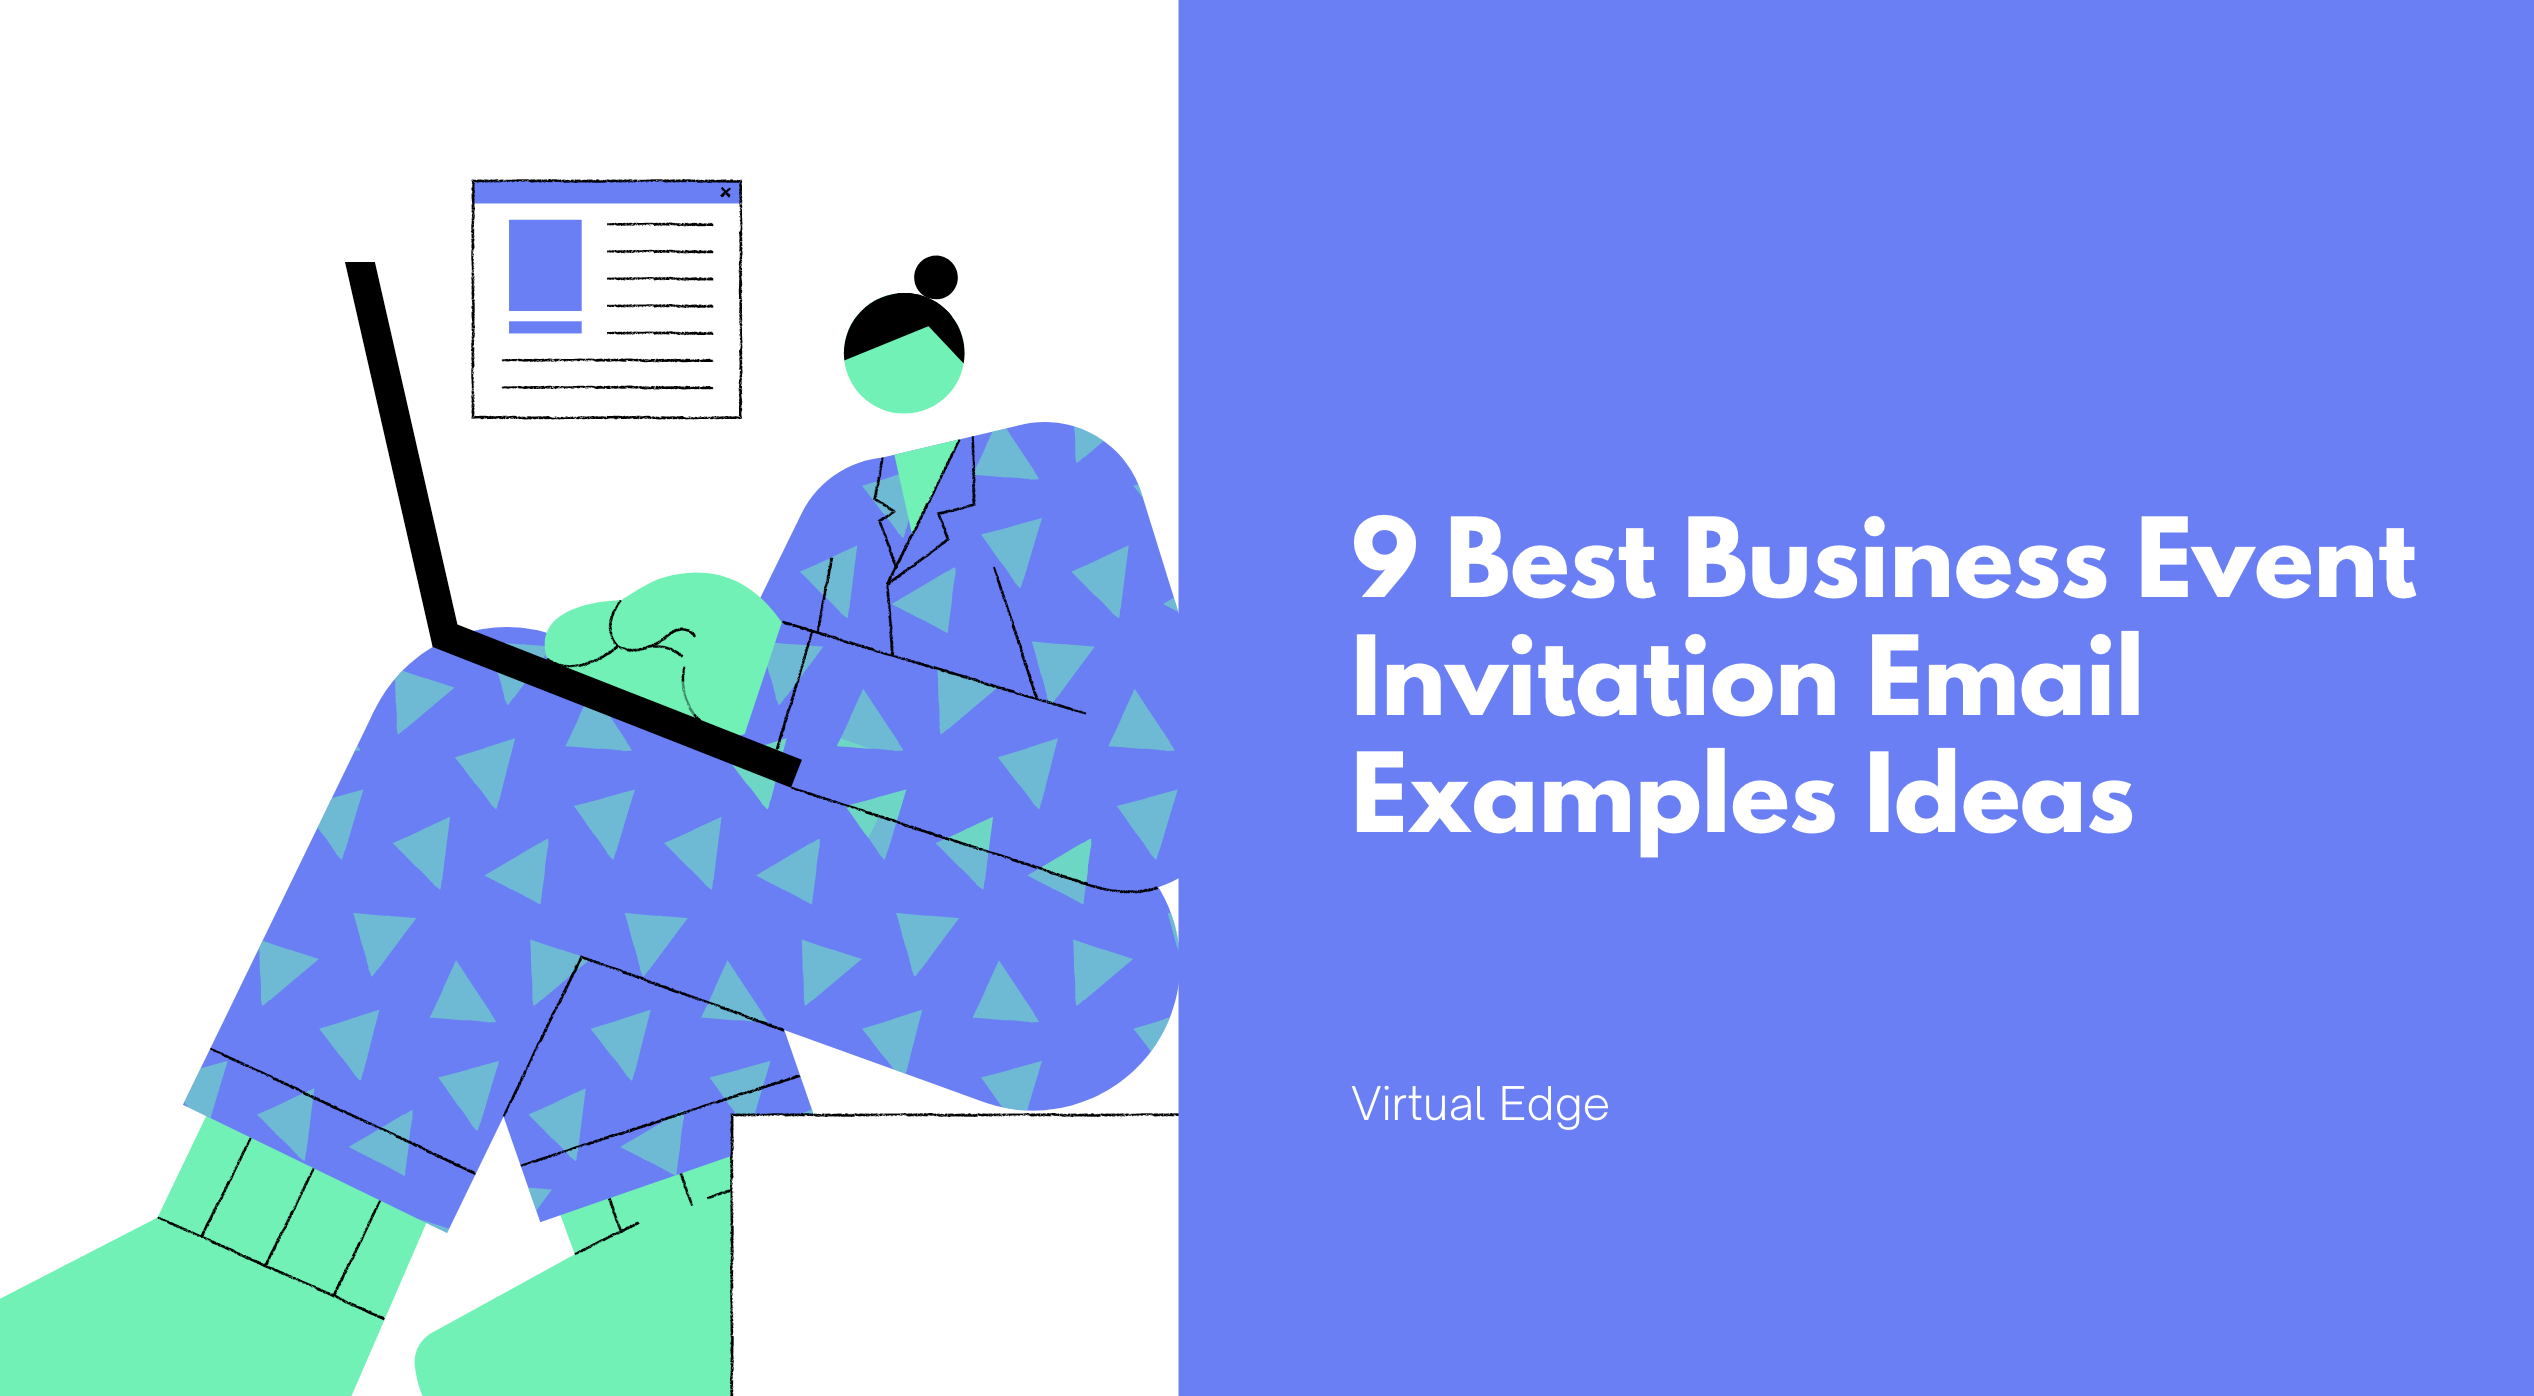 25 Best Business Event Invitation Email Examples Ideas  Virtual Edge